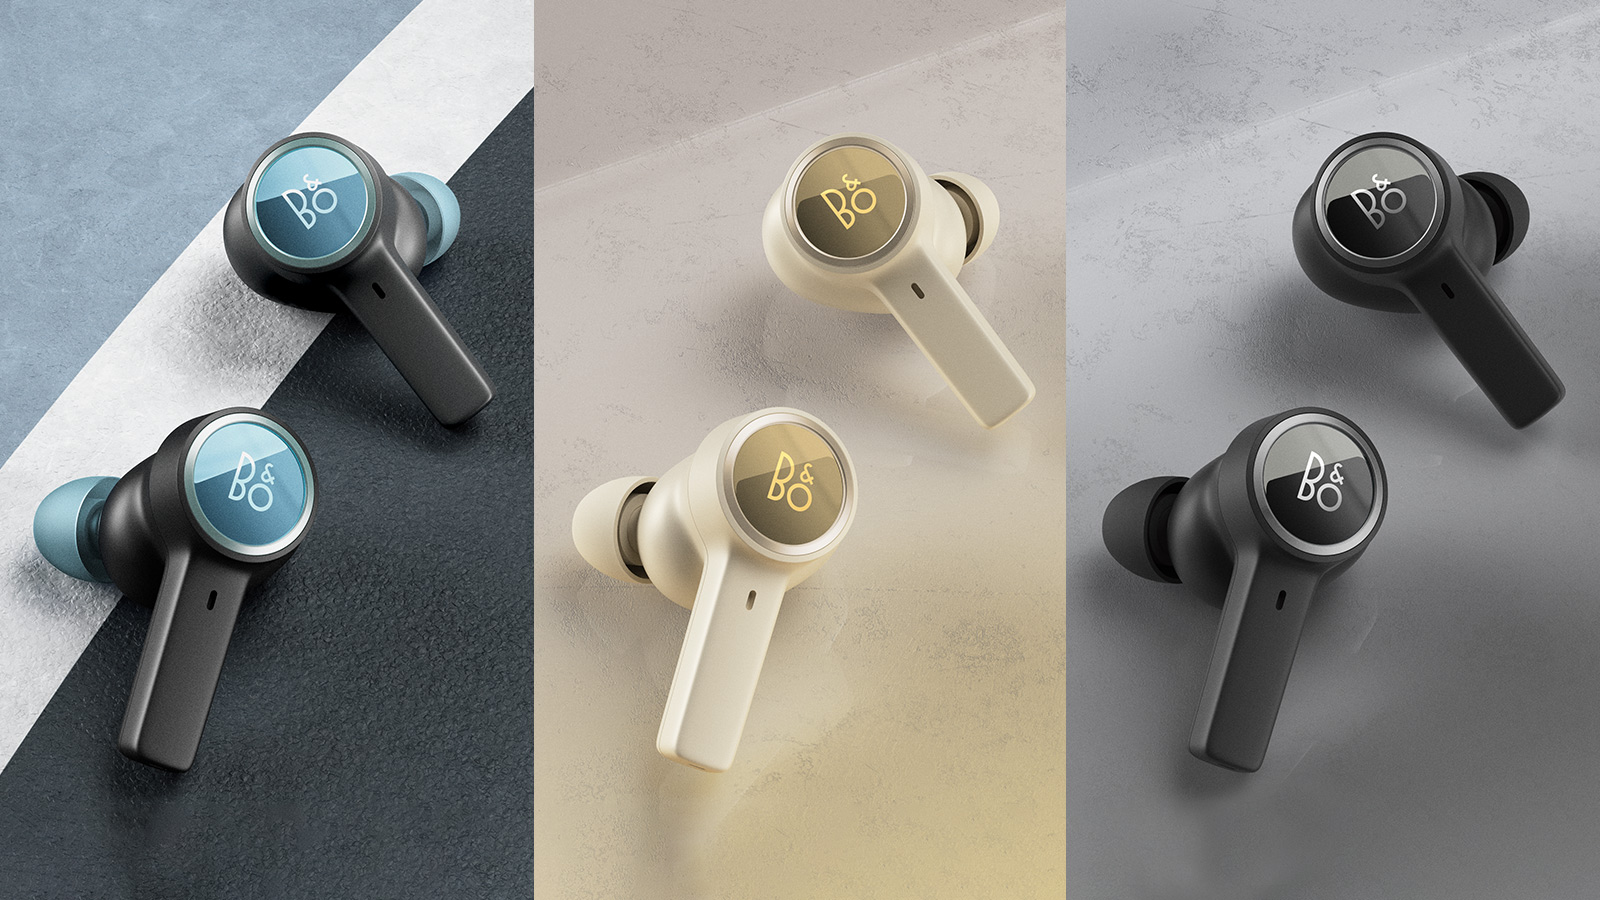 Bang & Olufsen Launches The New Beoplay EX Earbuds - IMBOLDN